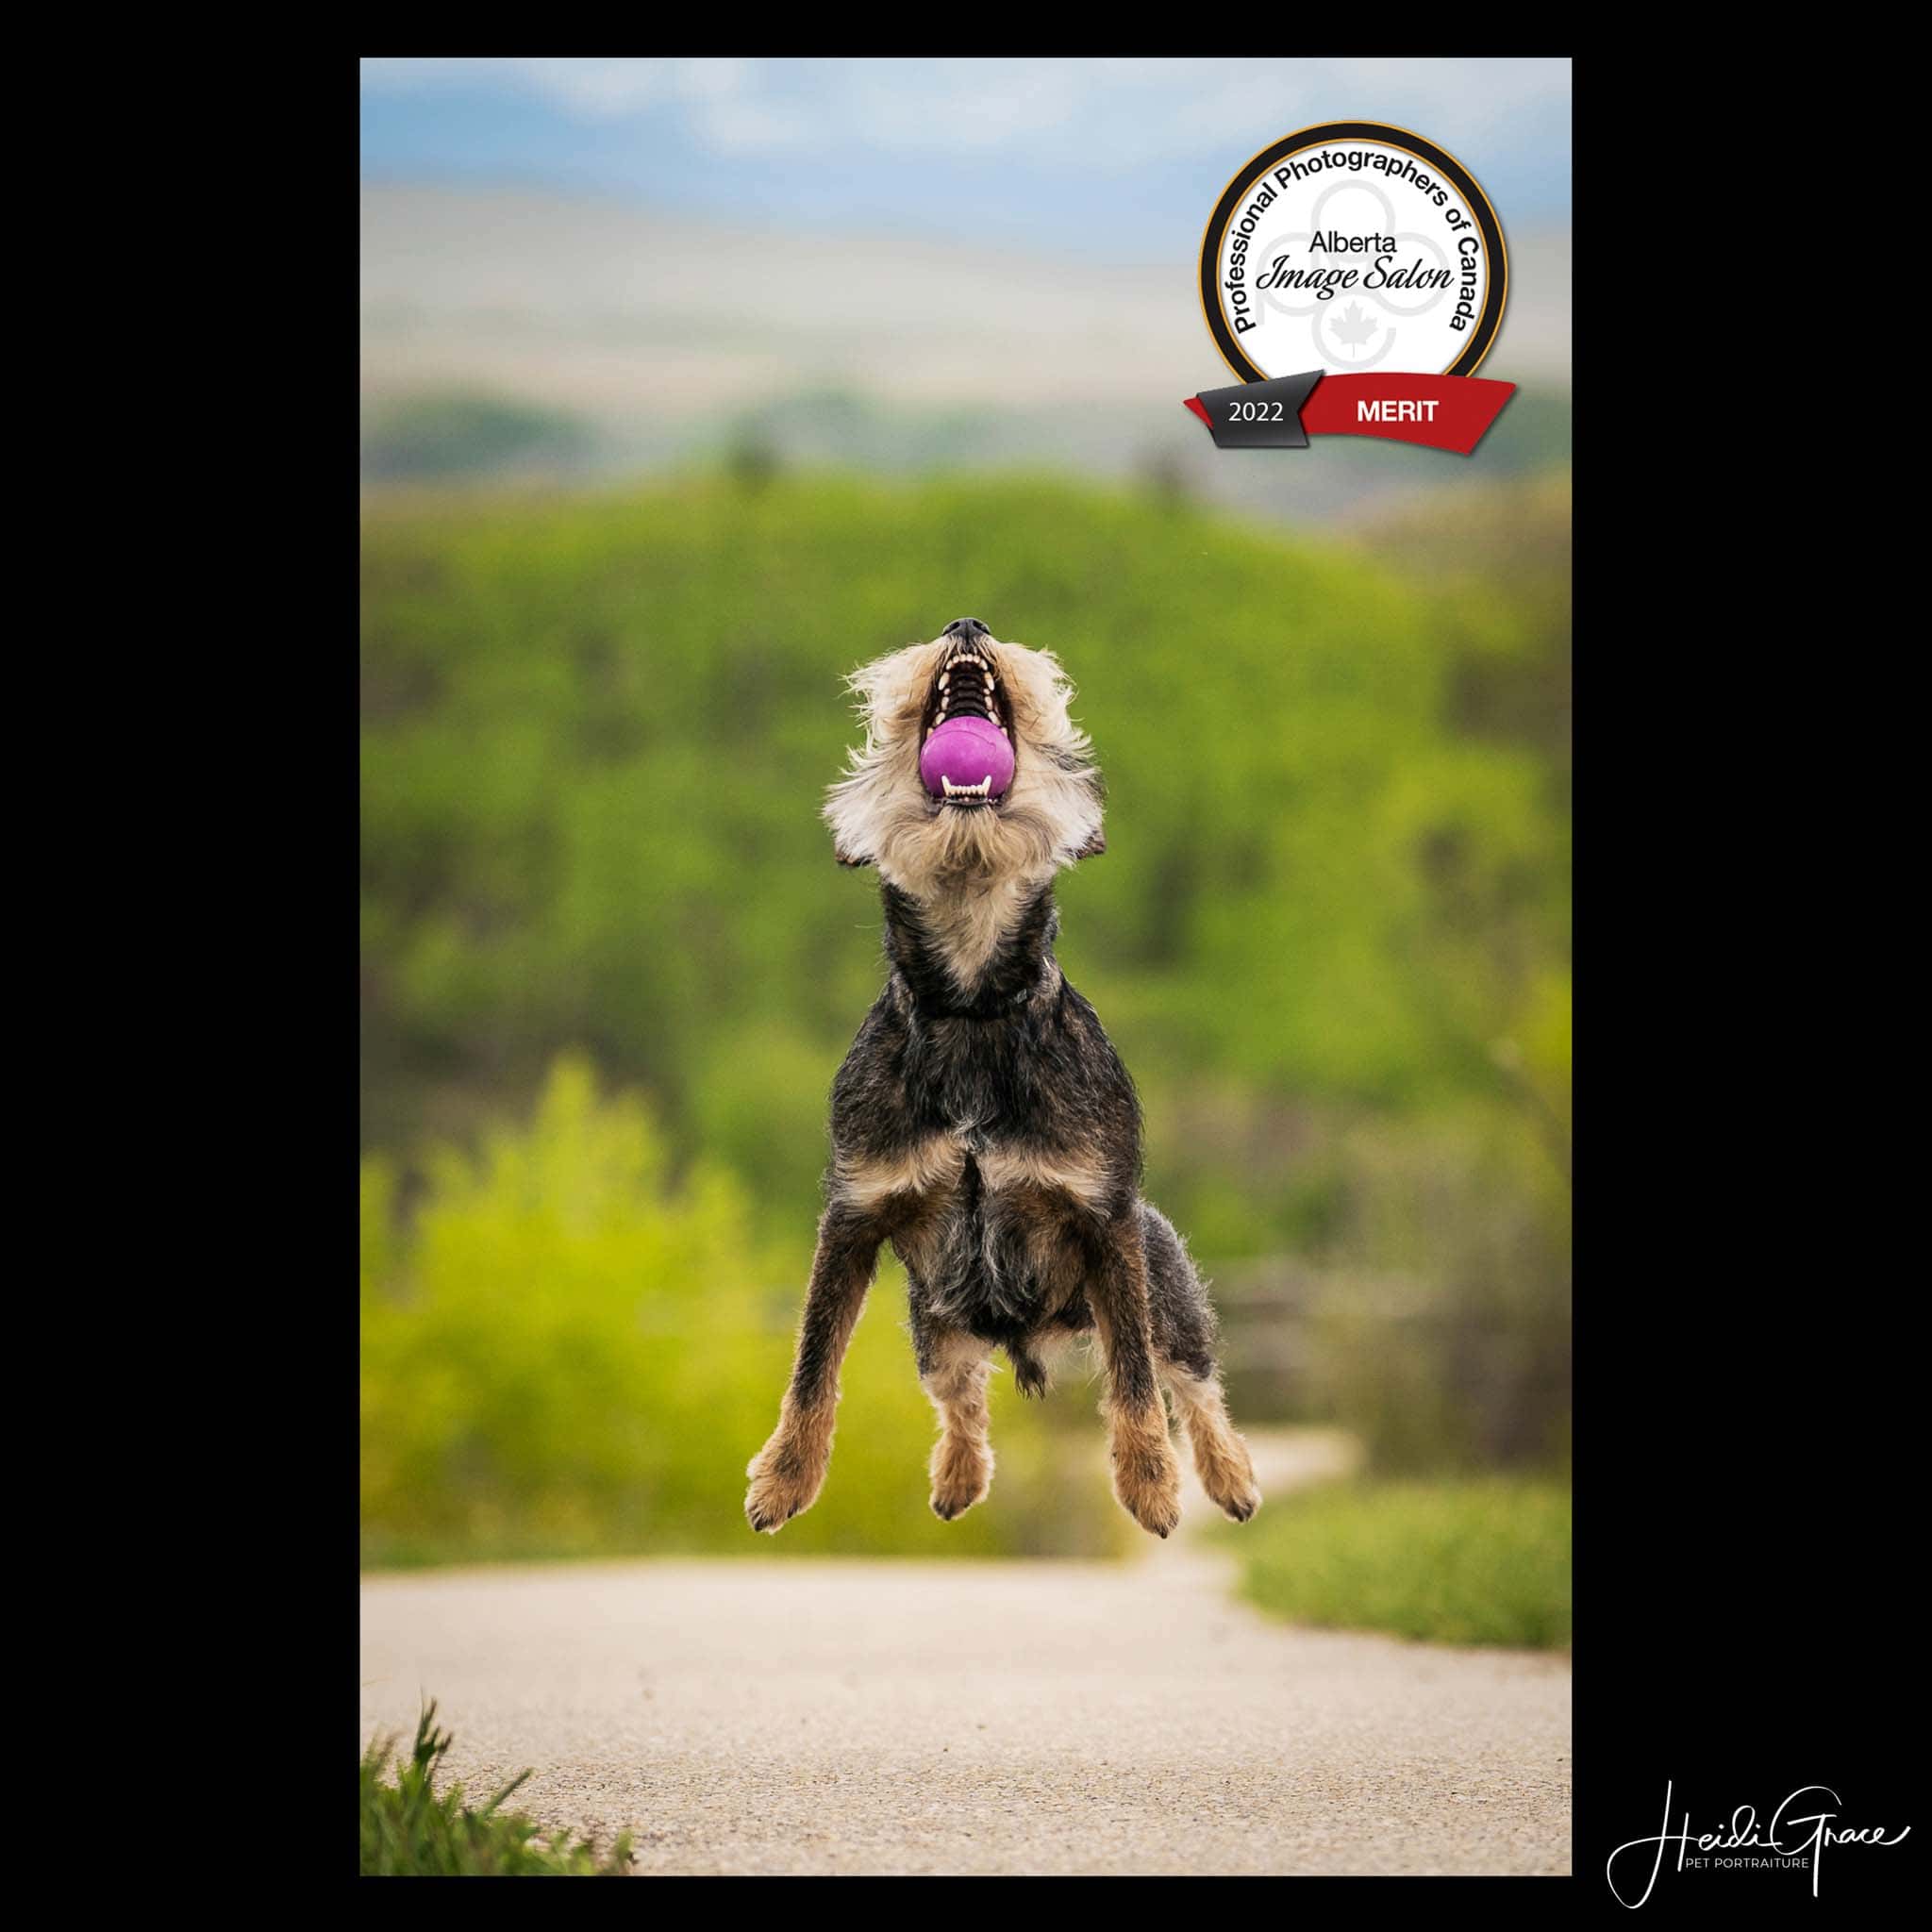 Best of Alberta Dog Photography Award on action portrait of dog jumping to catch a ball